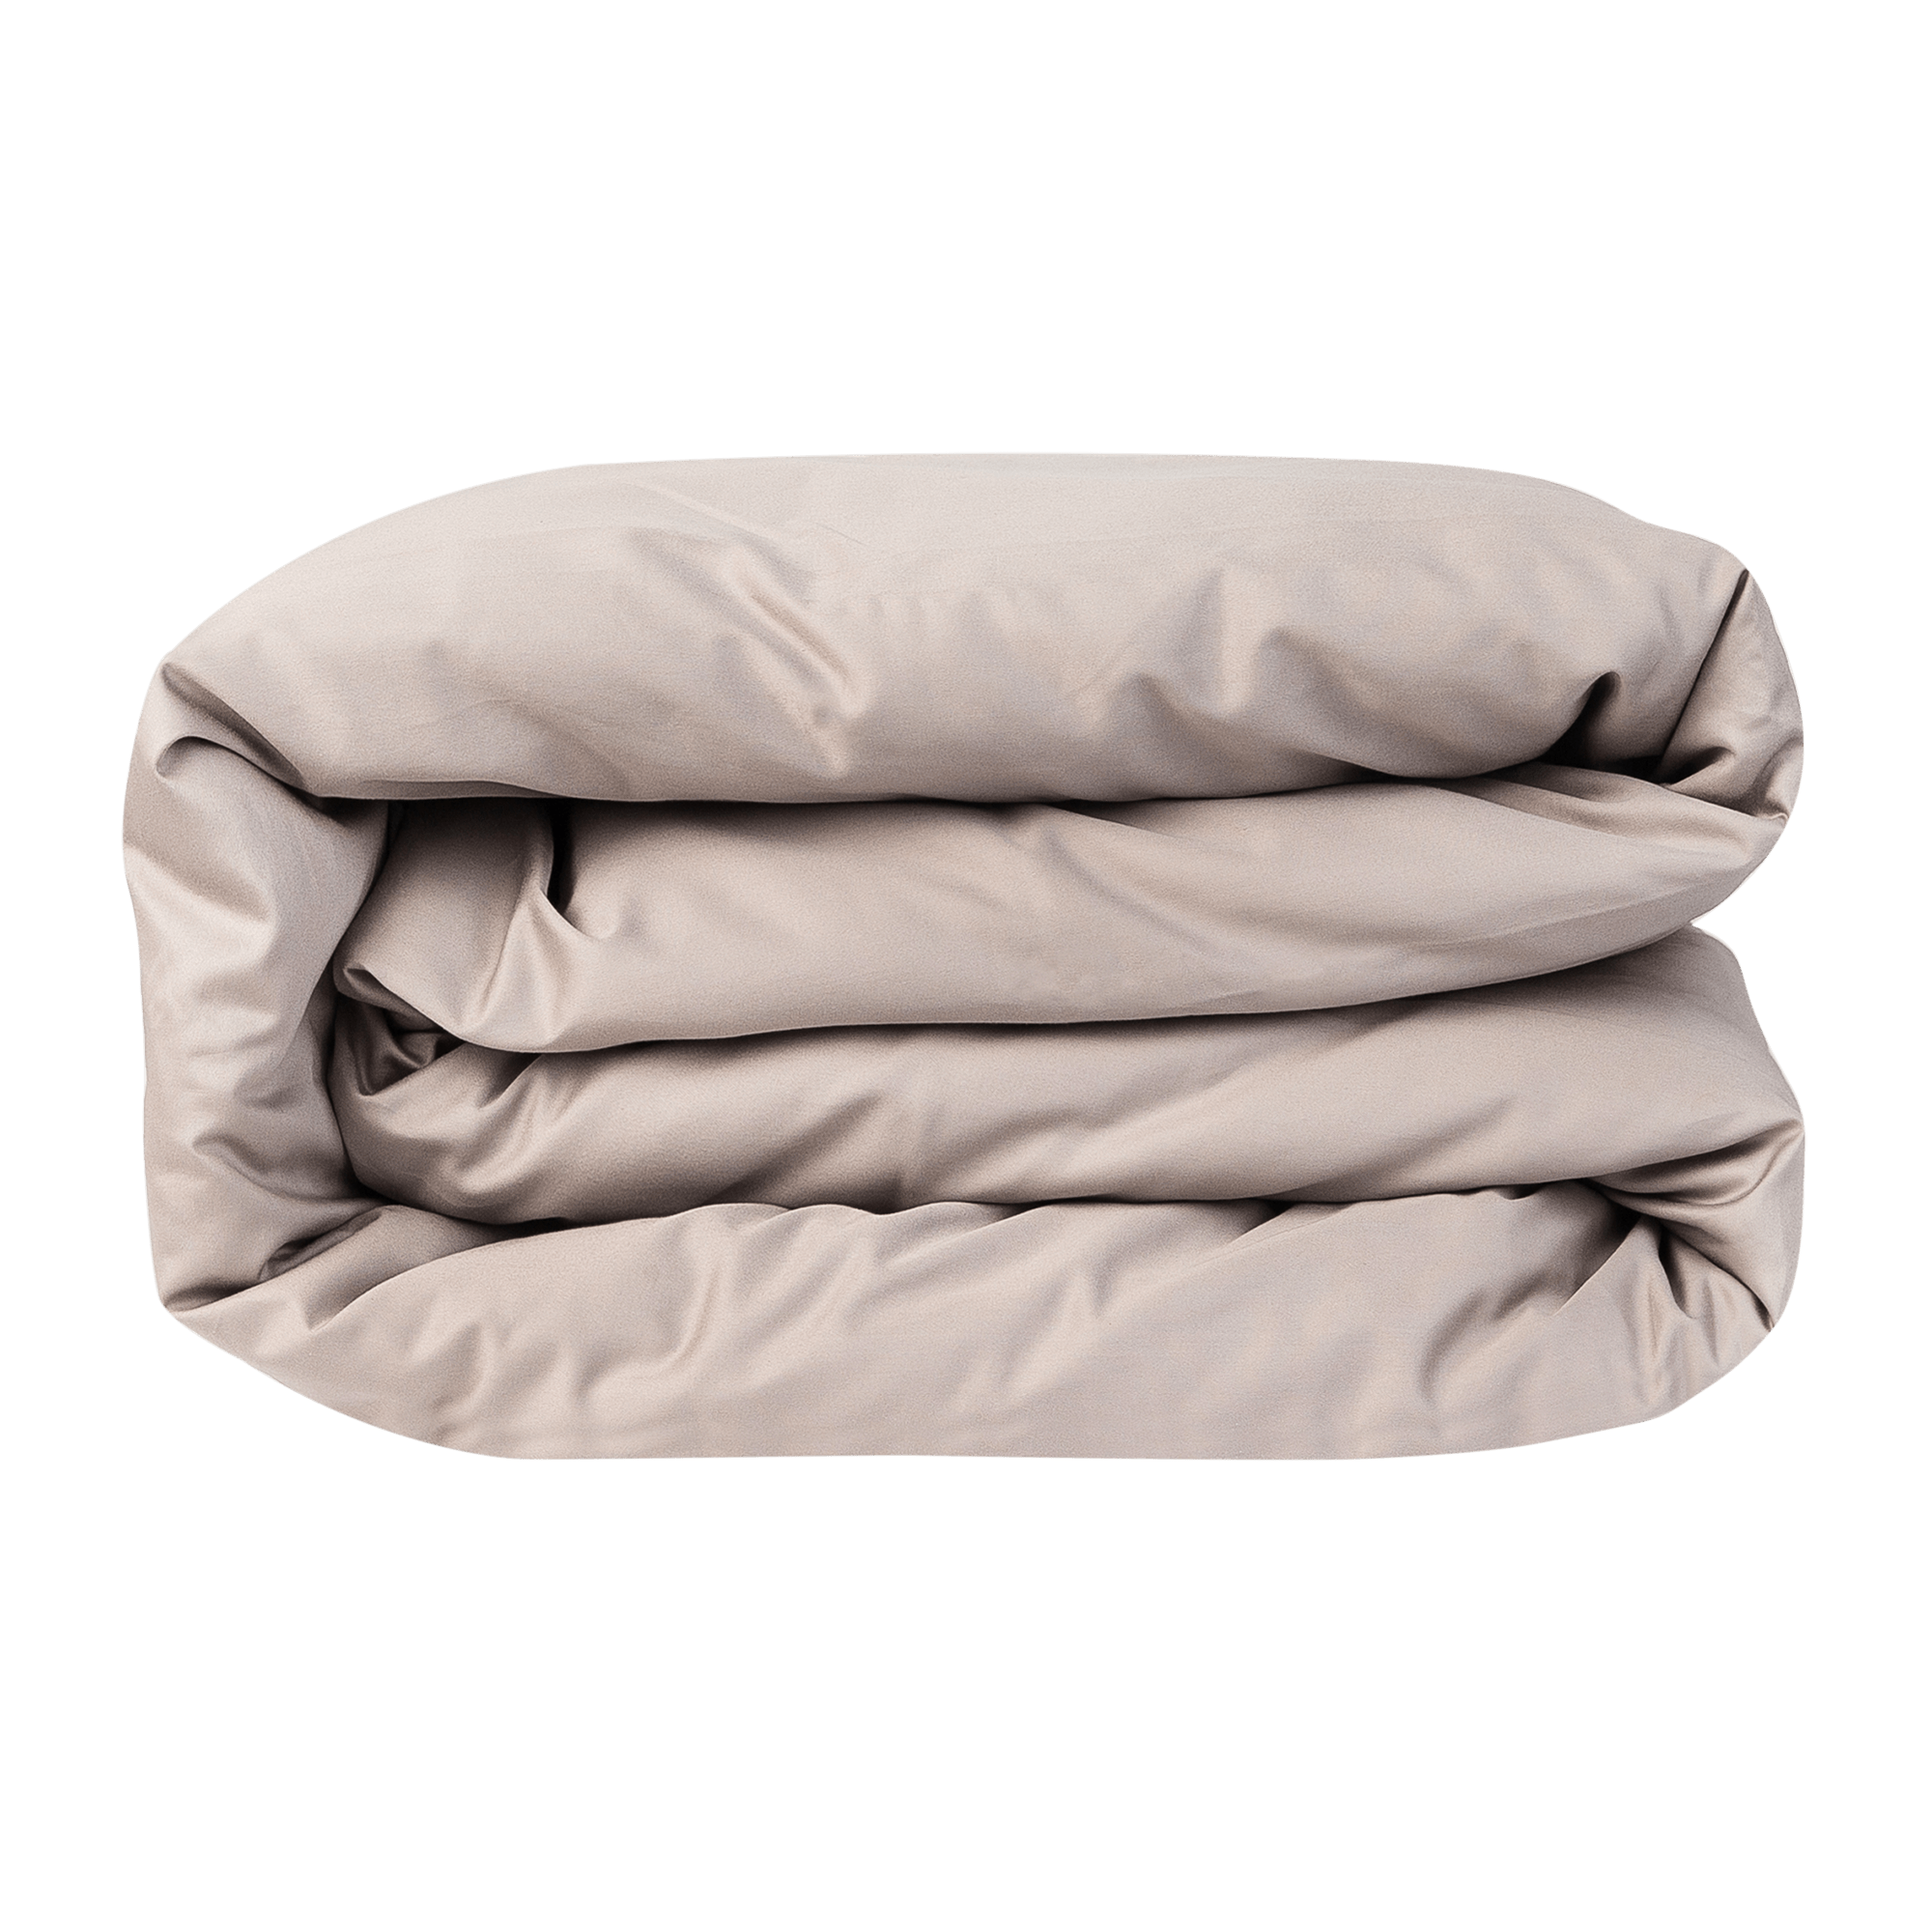  Folded Frosted Almond Sateen Duvet Cover